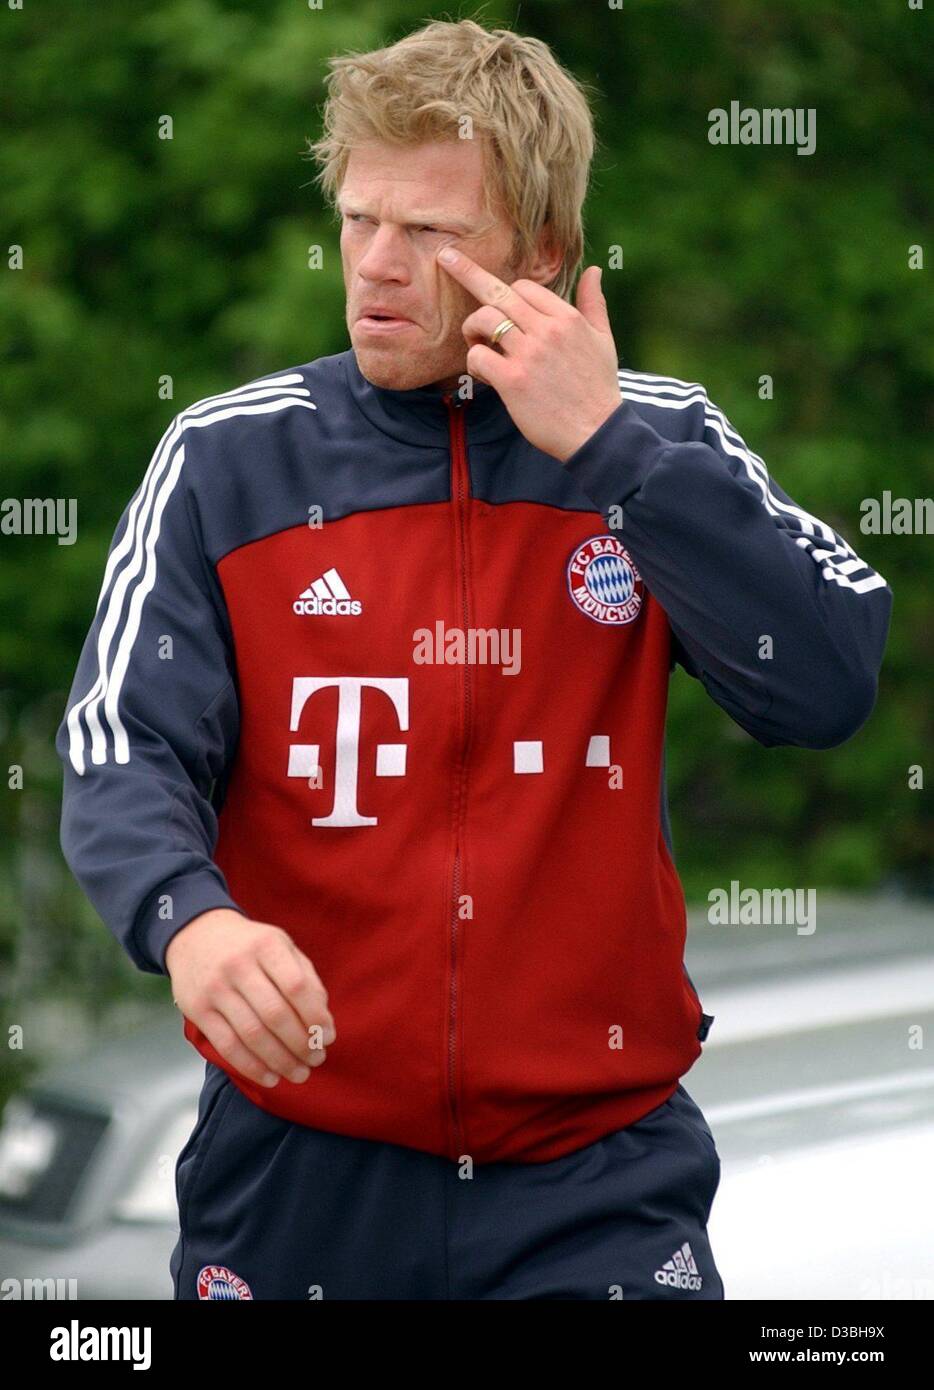 (dpa) - Oliver Kahn, goalkeeper of the German soccer club Bayern Munich, arrives to a training in Munich, 29 April 2003. Although Bayern Munich were crowned German premier league champions with four games still to go on 26 April, the team prepares the four remaining games as throroughly as always. Stock Photo